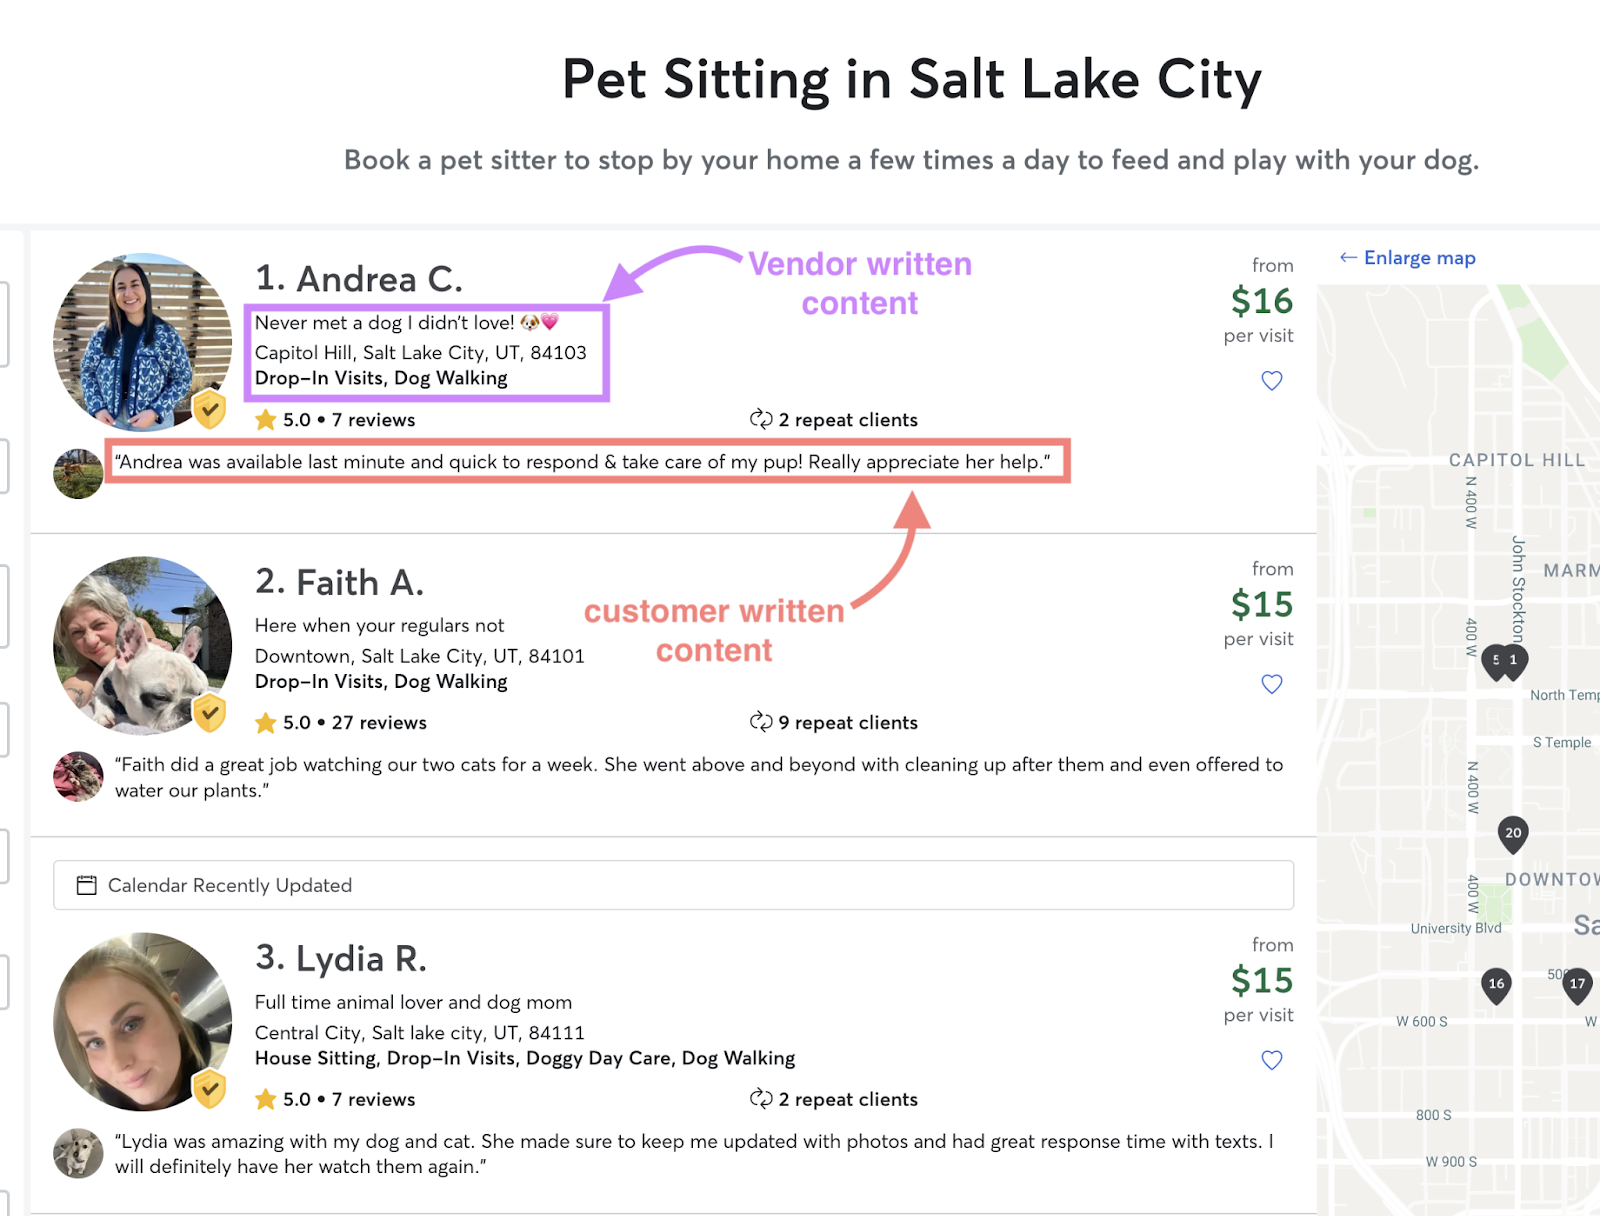 Rover's "Pet Sitting in Salt Lake City" page